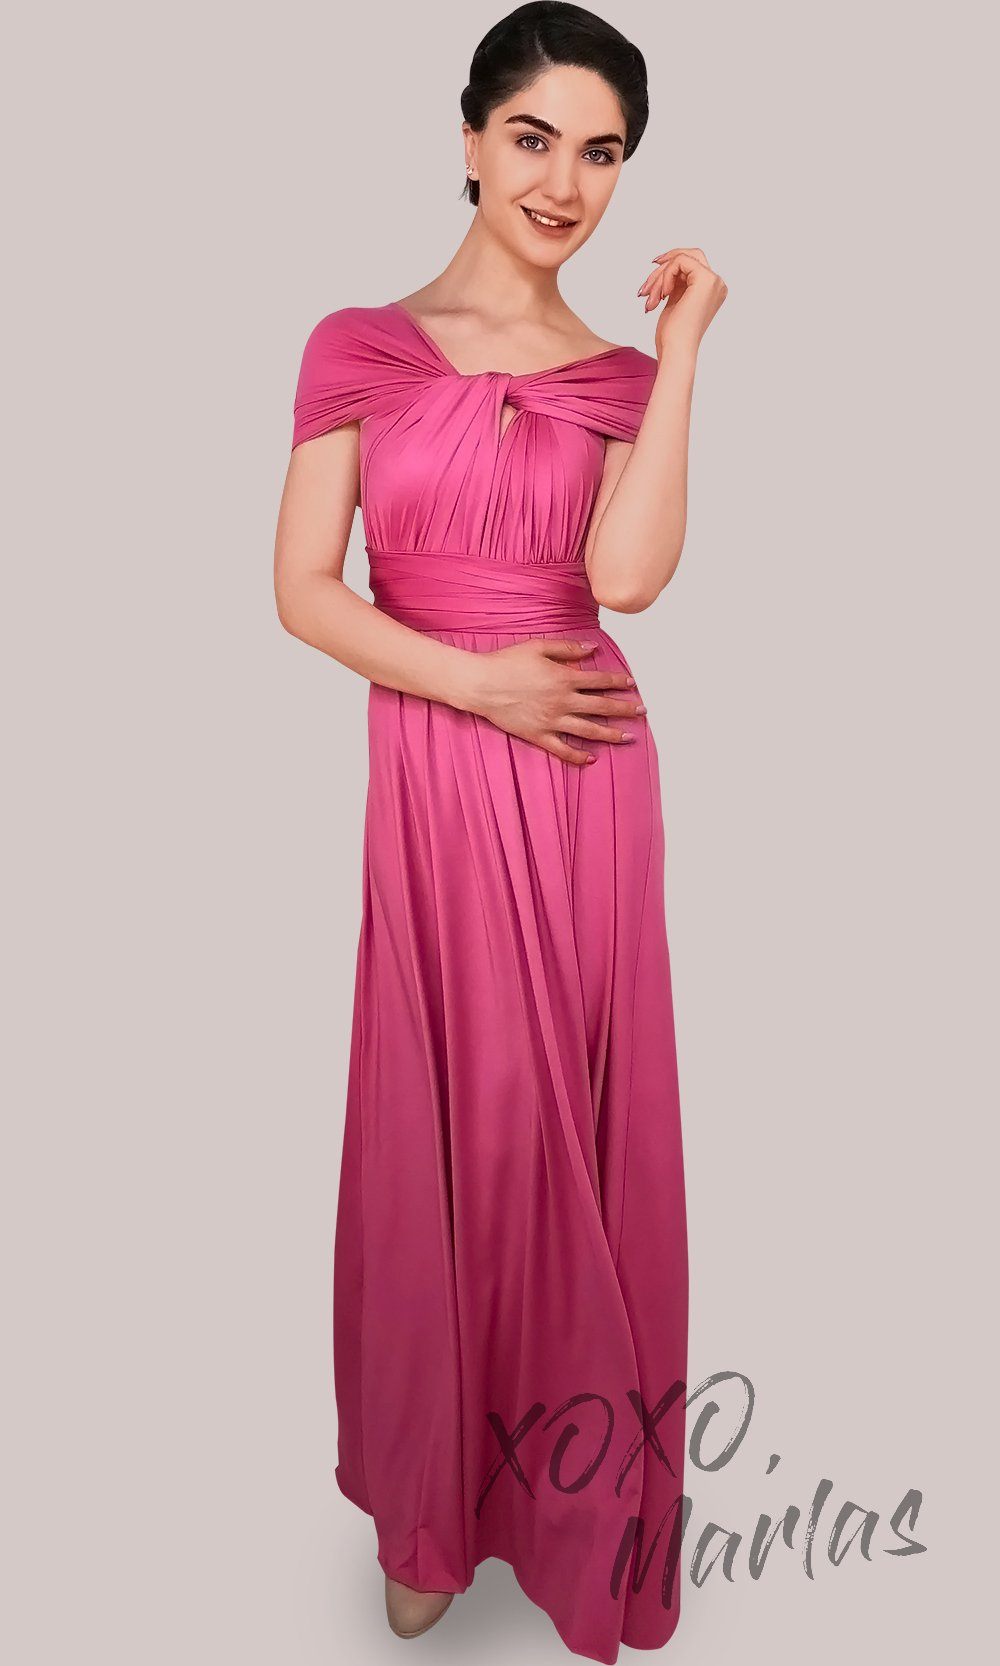 Long fuchsia infinity bridesmaid dress or multiway dress or convertible dress.One dress worn in multiple ways.This bright pink one size dress is great for bridesmaid, prom, destination wedding, gala, cheap western party dress, semi formal, cocktail